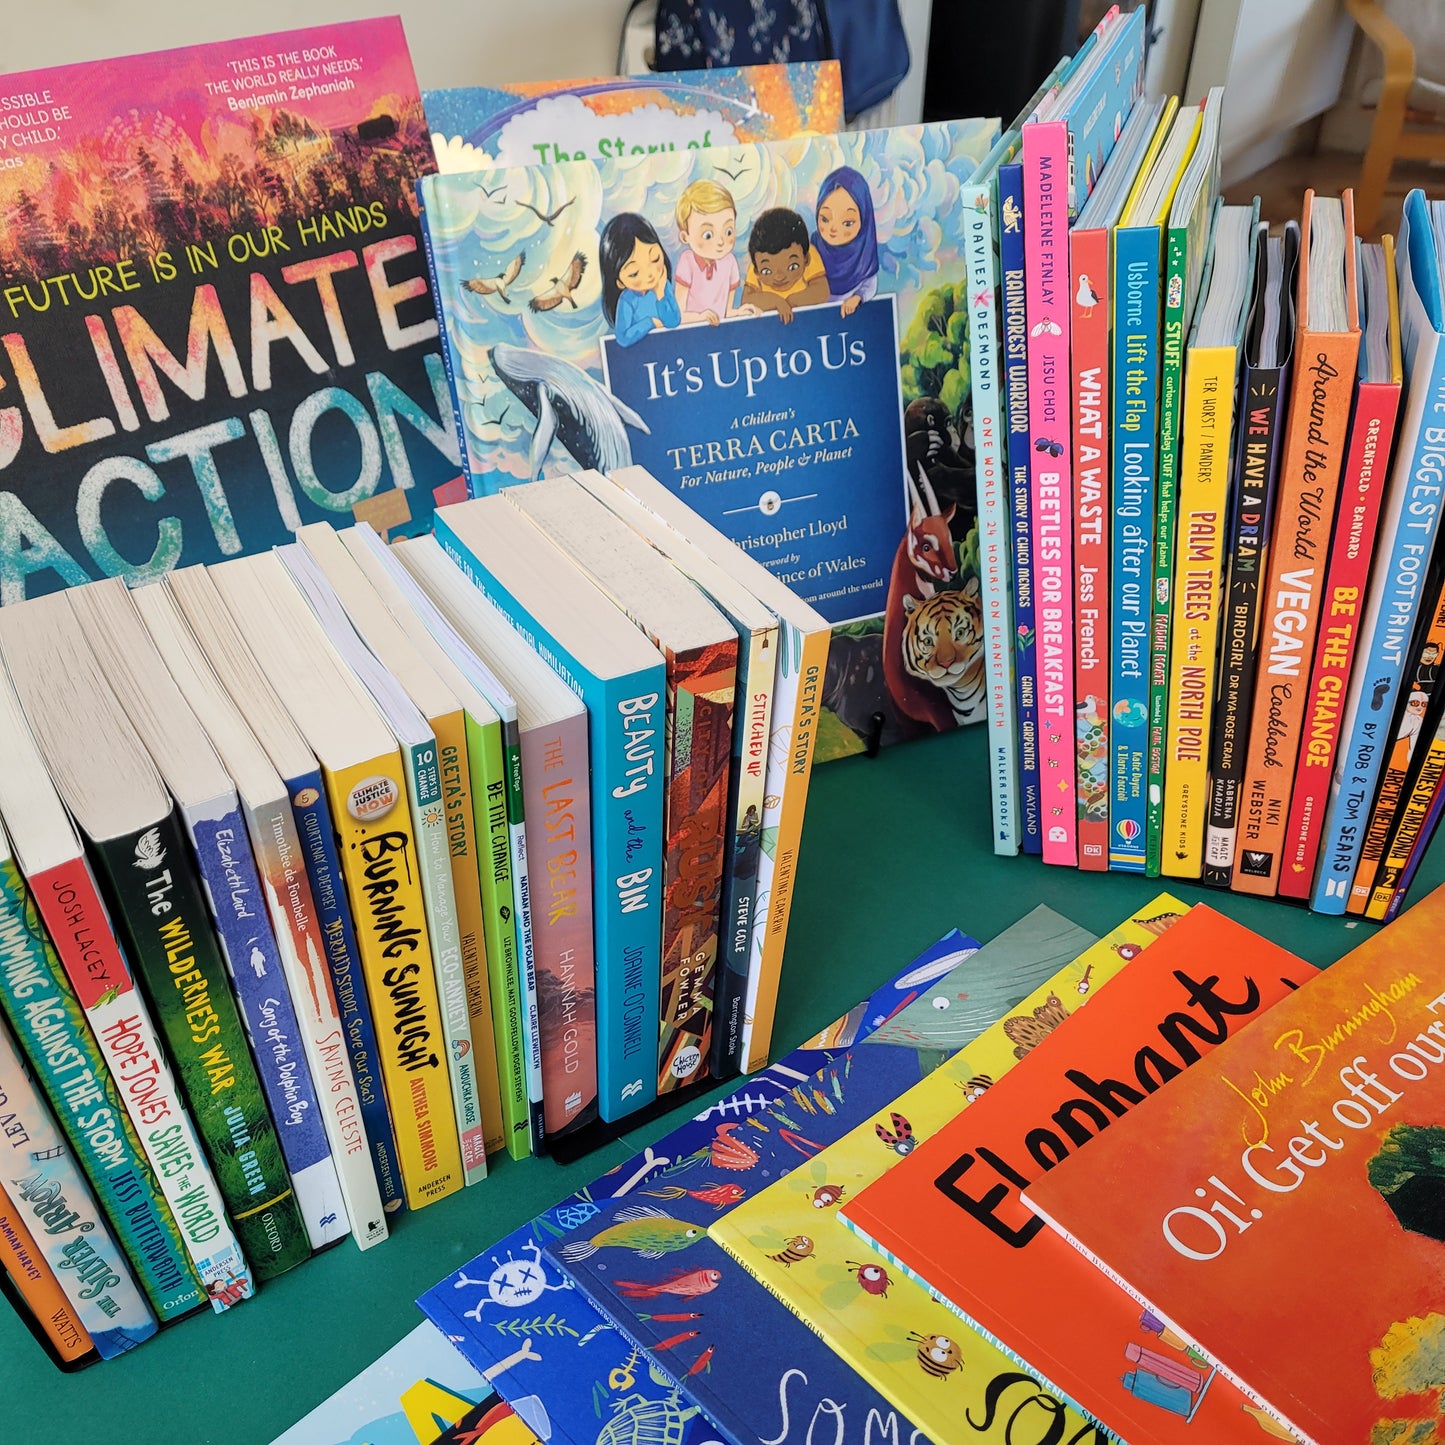 Primary School (Age 4-11) Climate & Environment Book Collection (Both Fiction & Non-Fiction) 75 Books